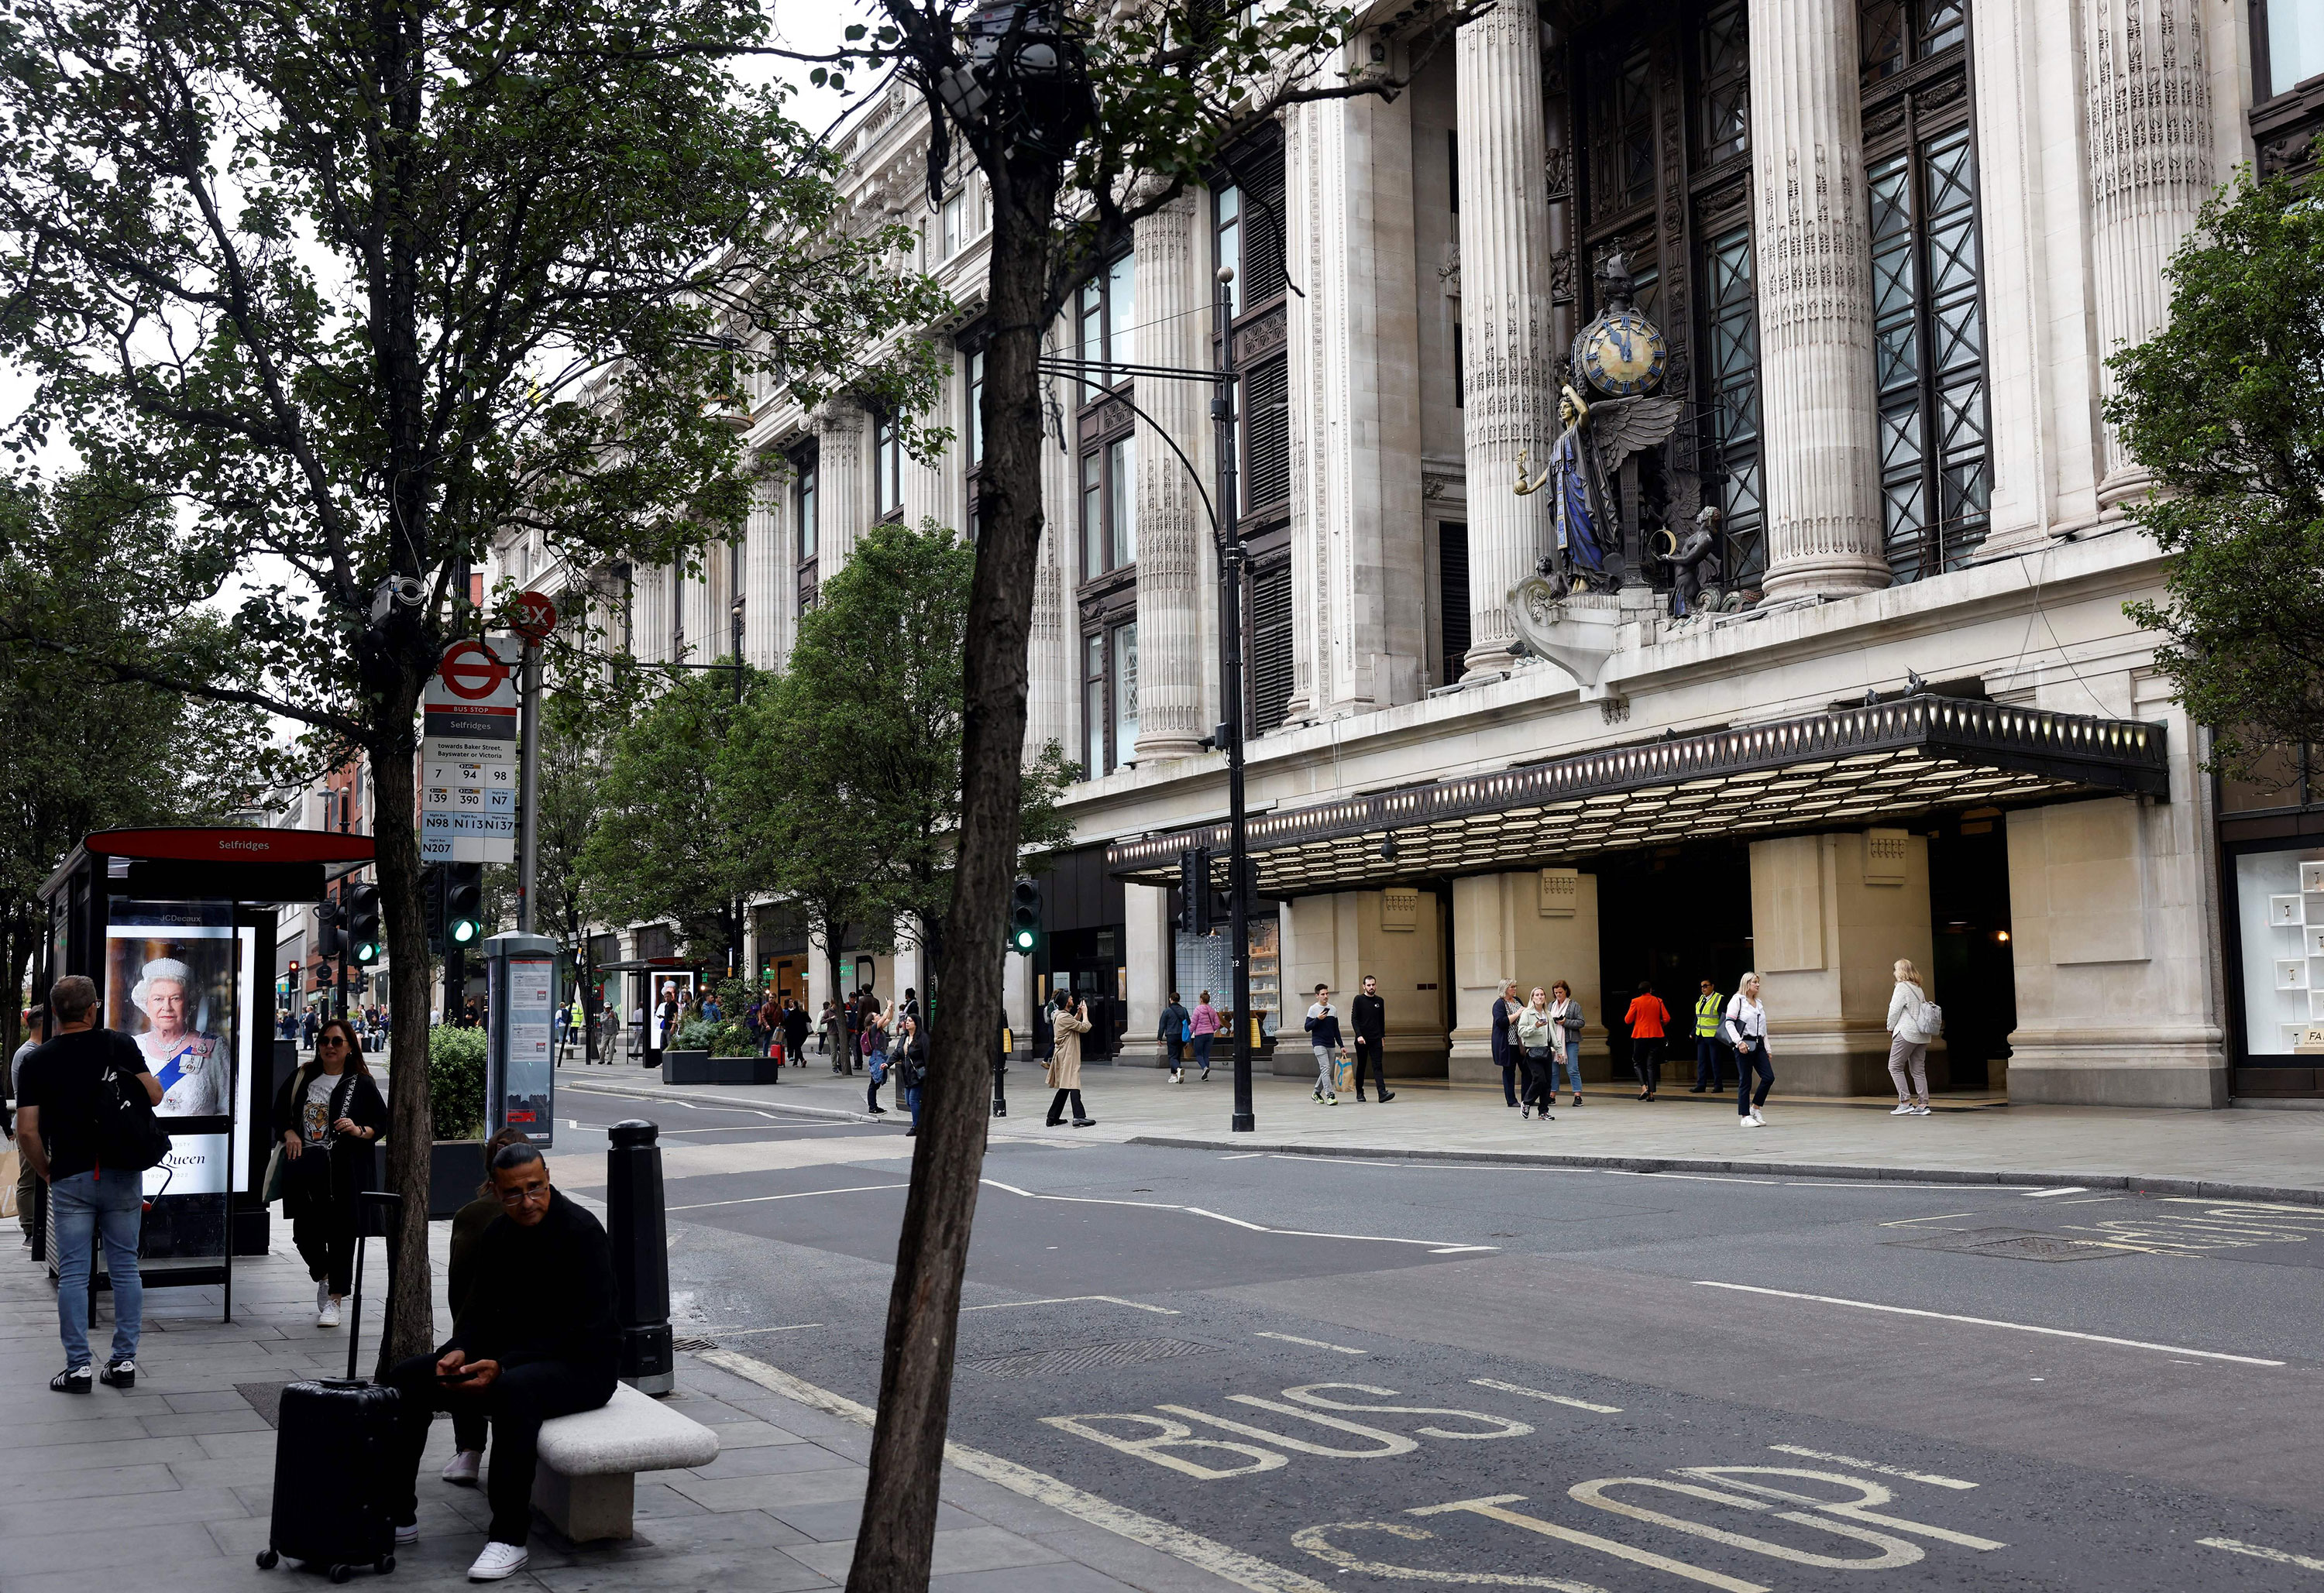 People walk past closed shops, including Selfridges, on Oxford Street in London on Friday.